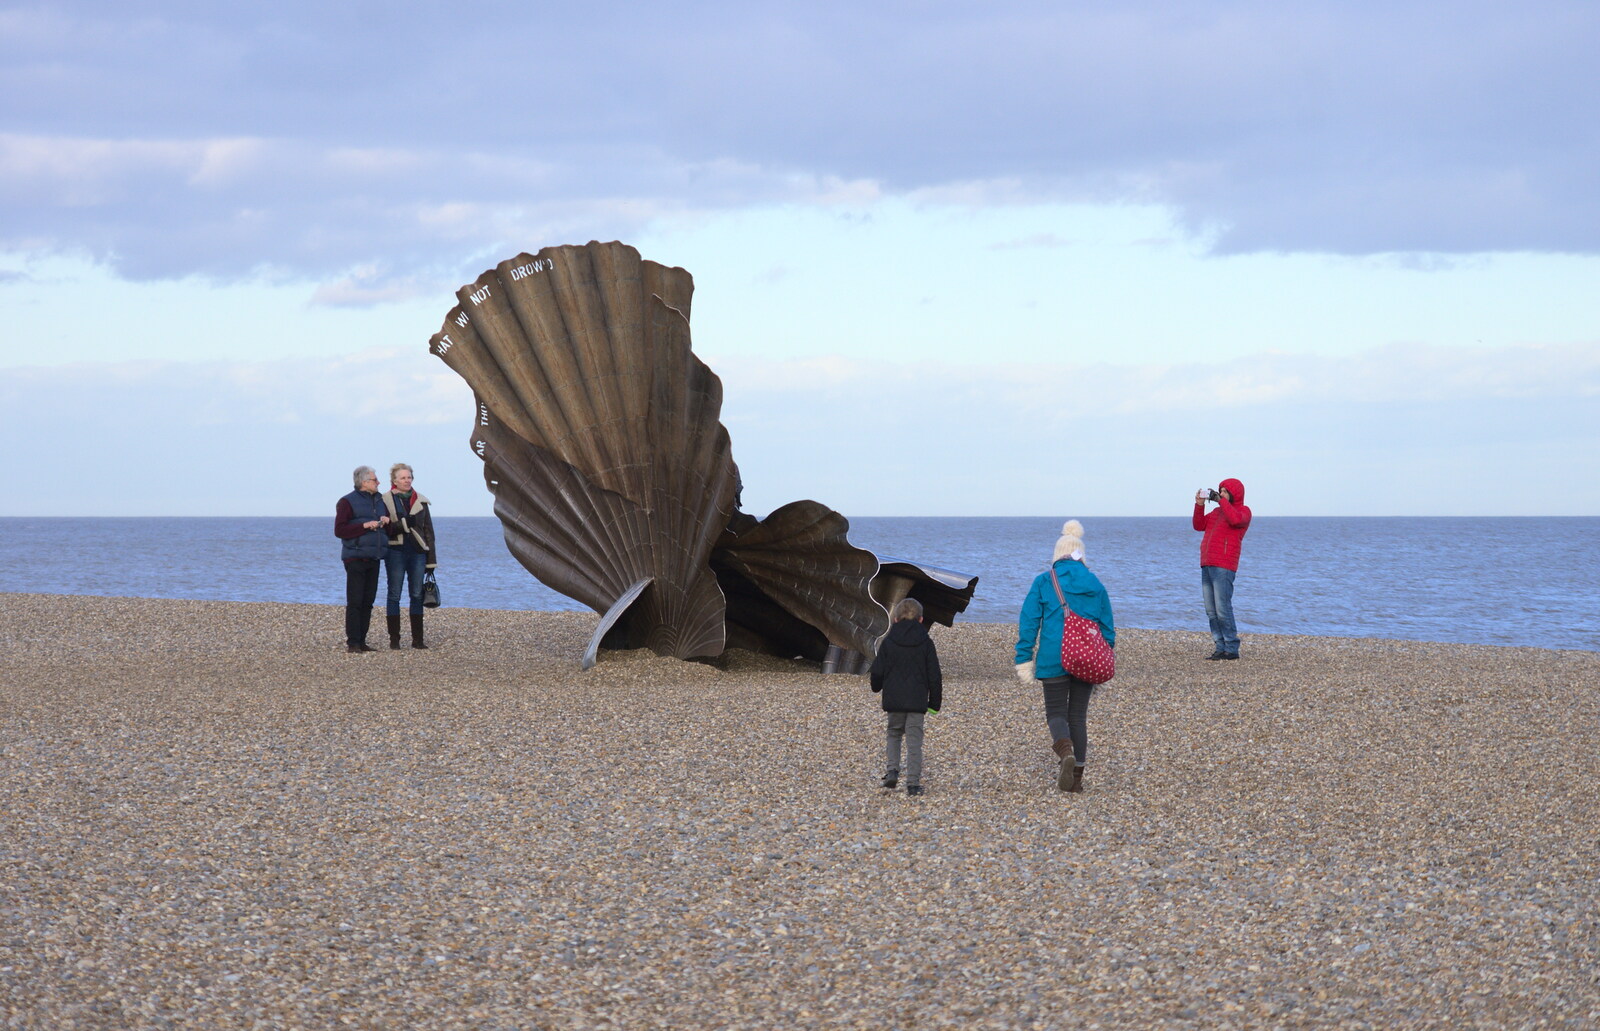 We're back at the Scallop from A Trip to Aldeburgh, Suffolk - 7th February 2016